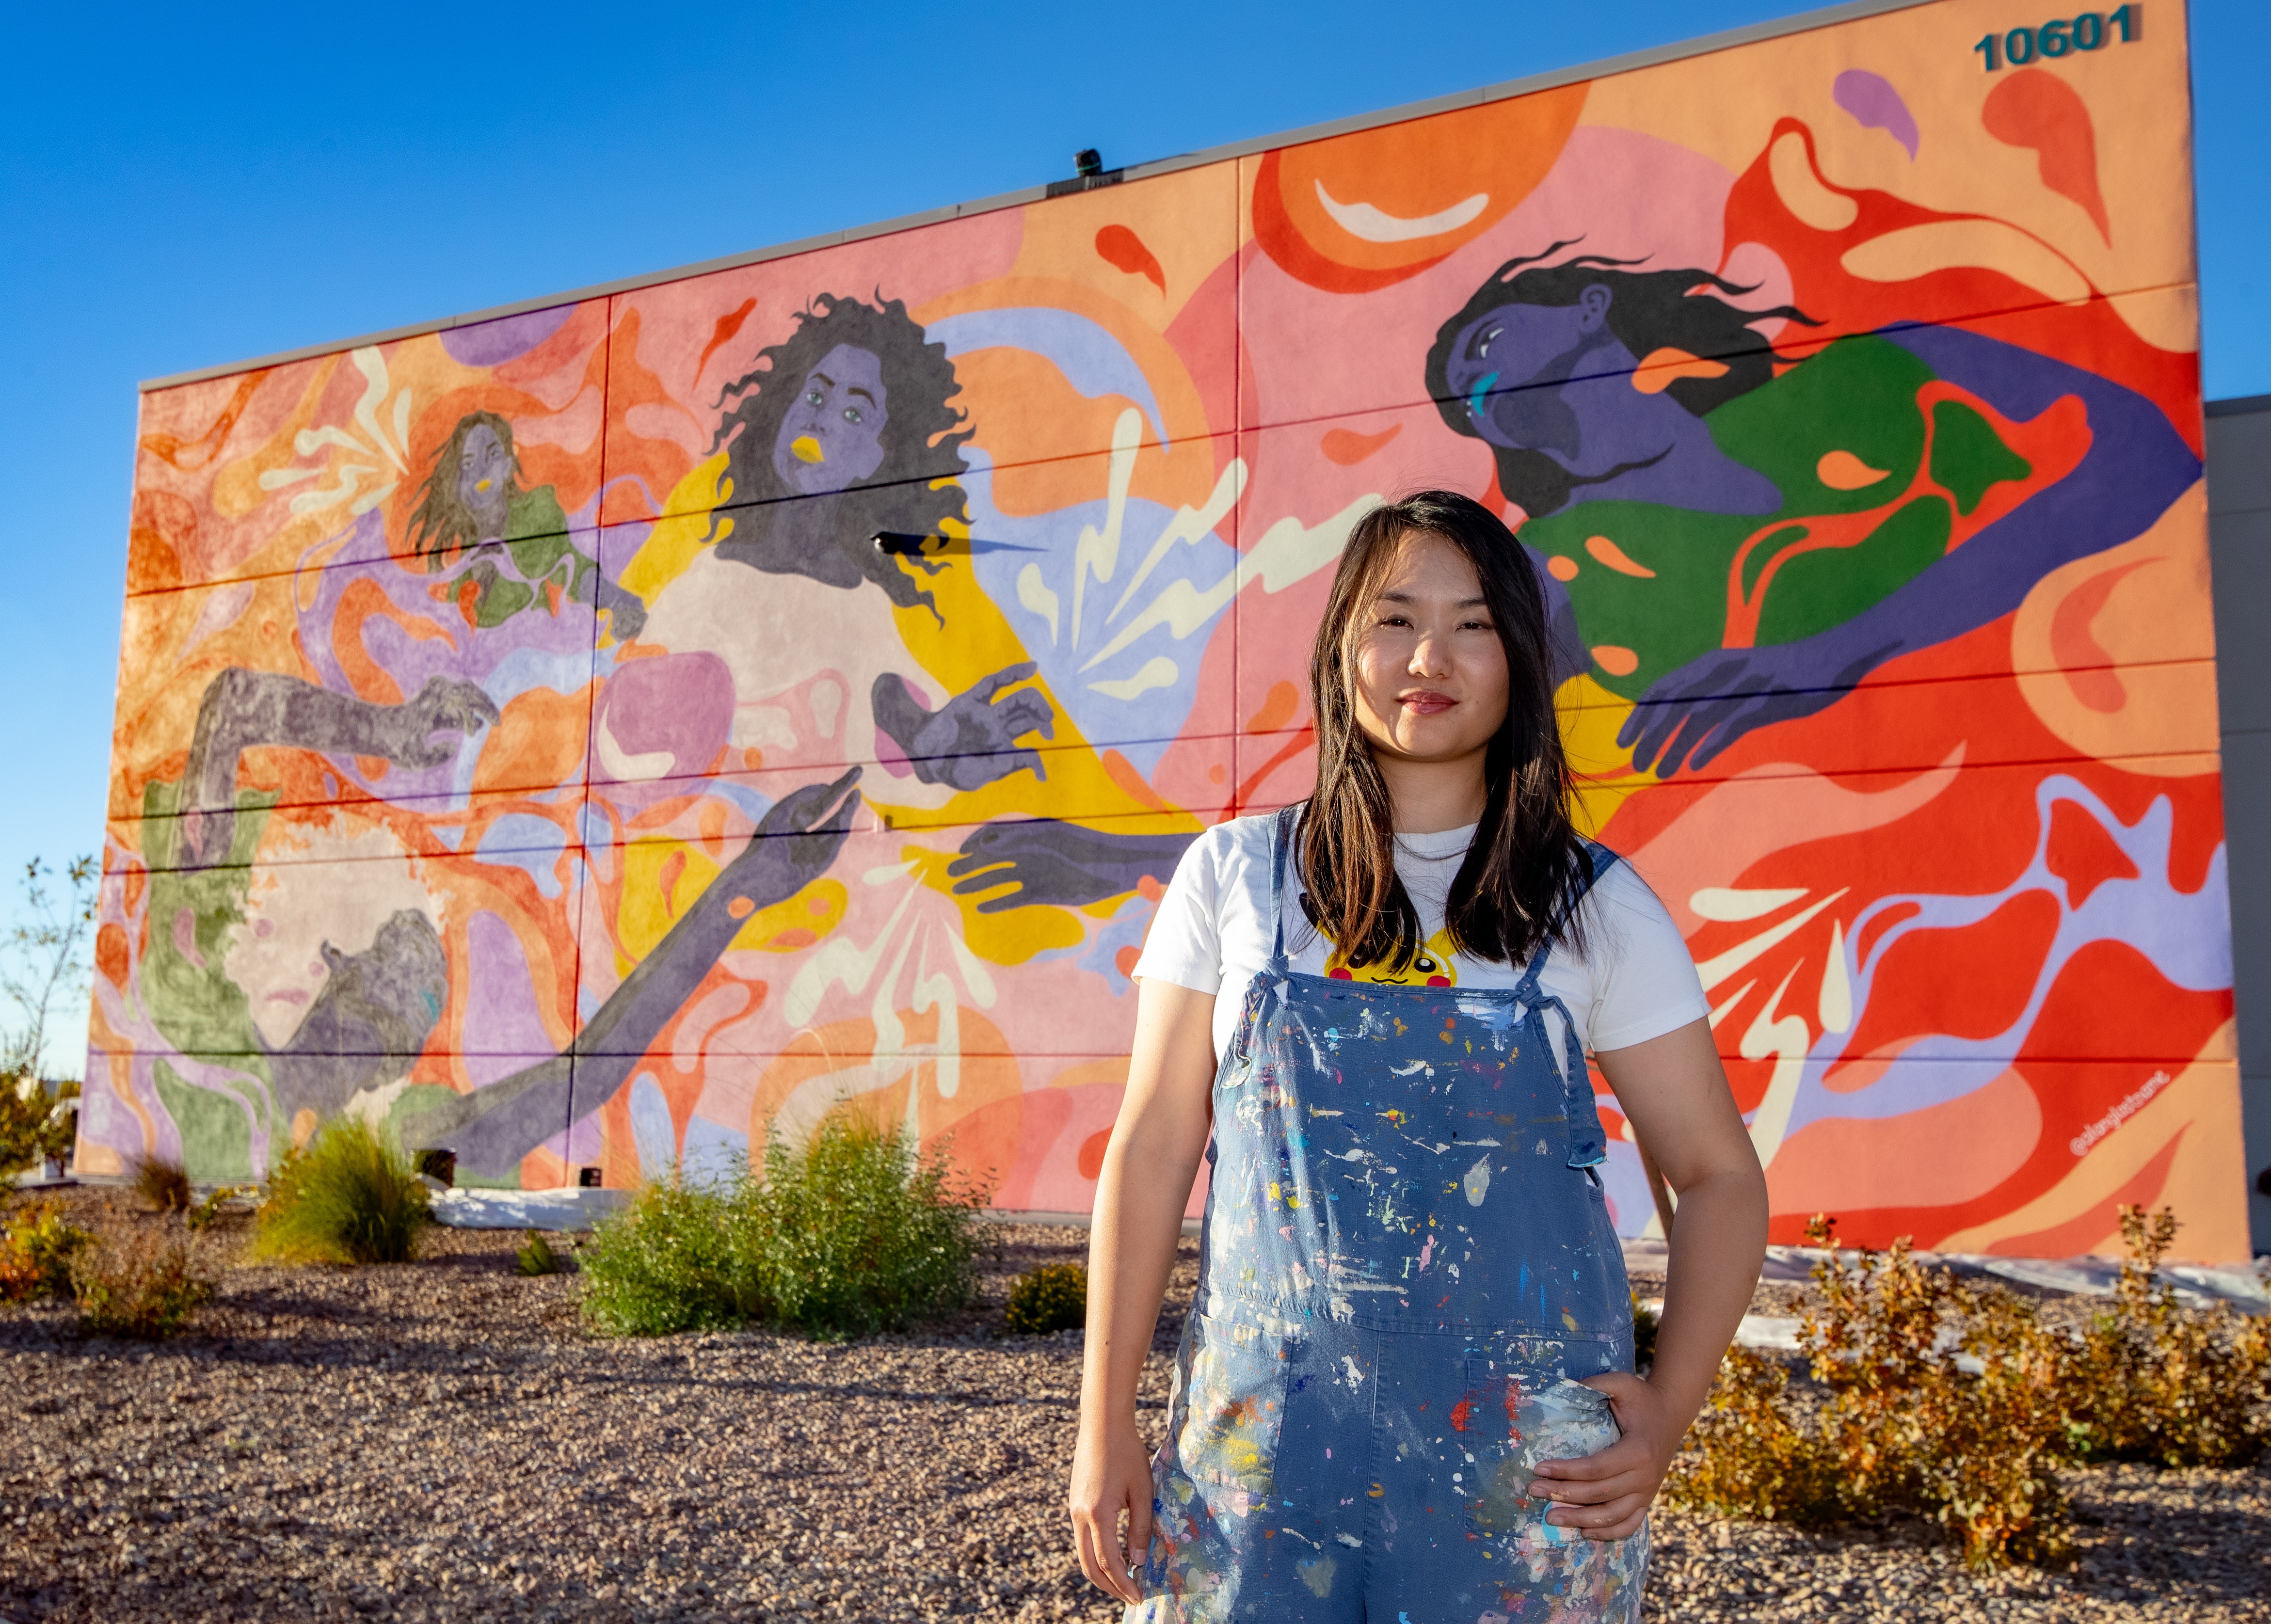 Acclaimed artist Amanda Phingbodhipakkiya, with help from students at nearby Technology Leadership High School, painted a large mural in the heart of the Sandia Science & Technology Park. A second art installation is in early development. 